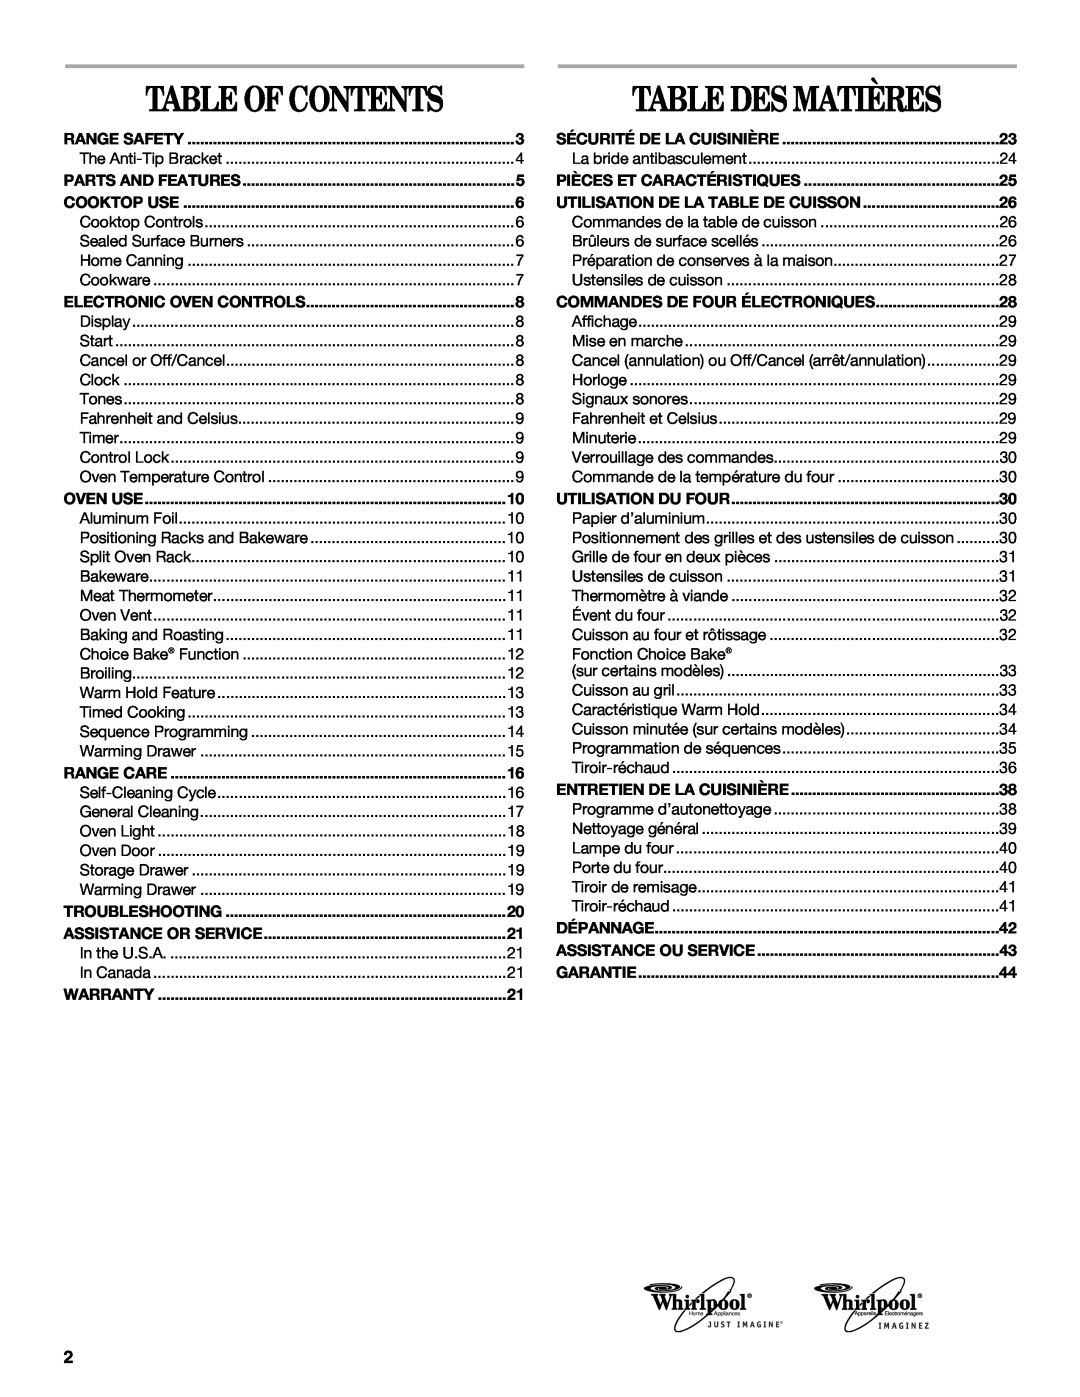 Whirlpool 9761040 manual Table Des Matières, Table Of Contents 